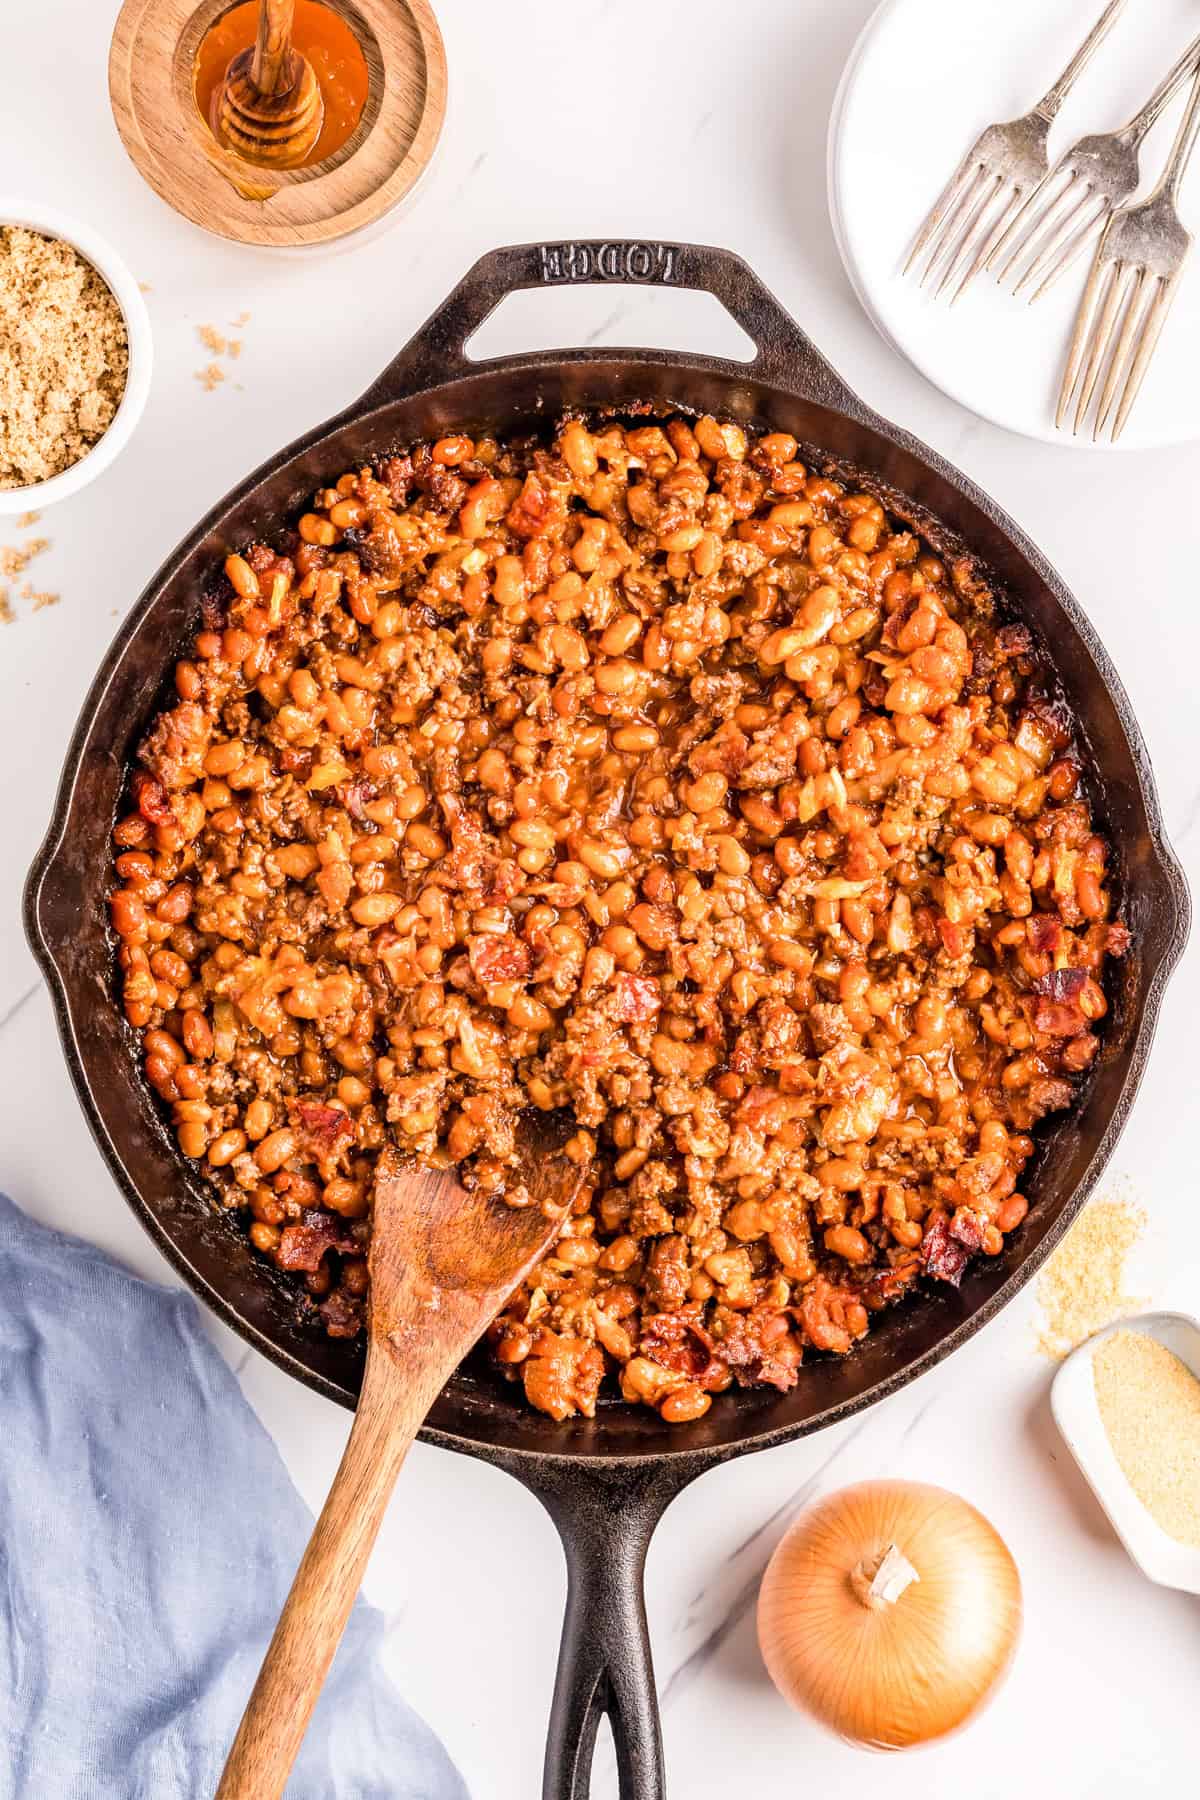 Overhead finished Baked Beans with Ground beef in cast iron skillet with wooden spoon and ingredients surrounding skillet.